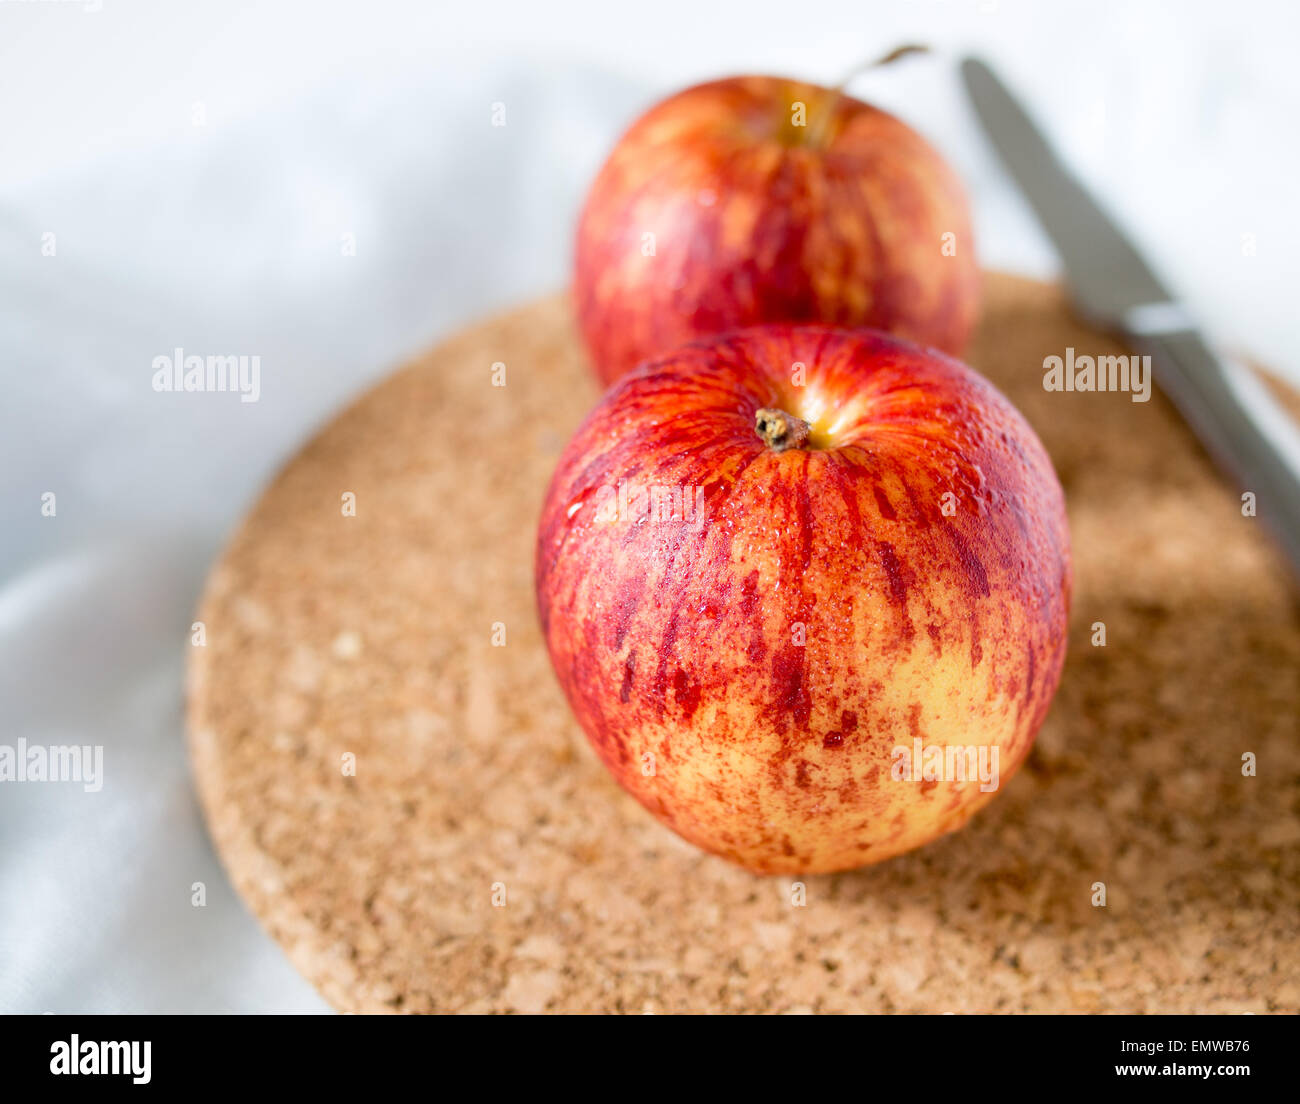 Two red apples on cork mat Stock Photo